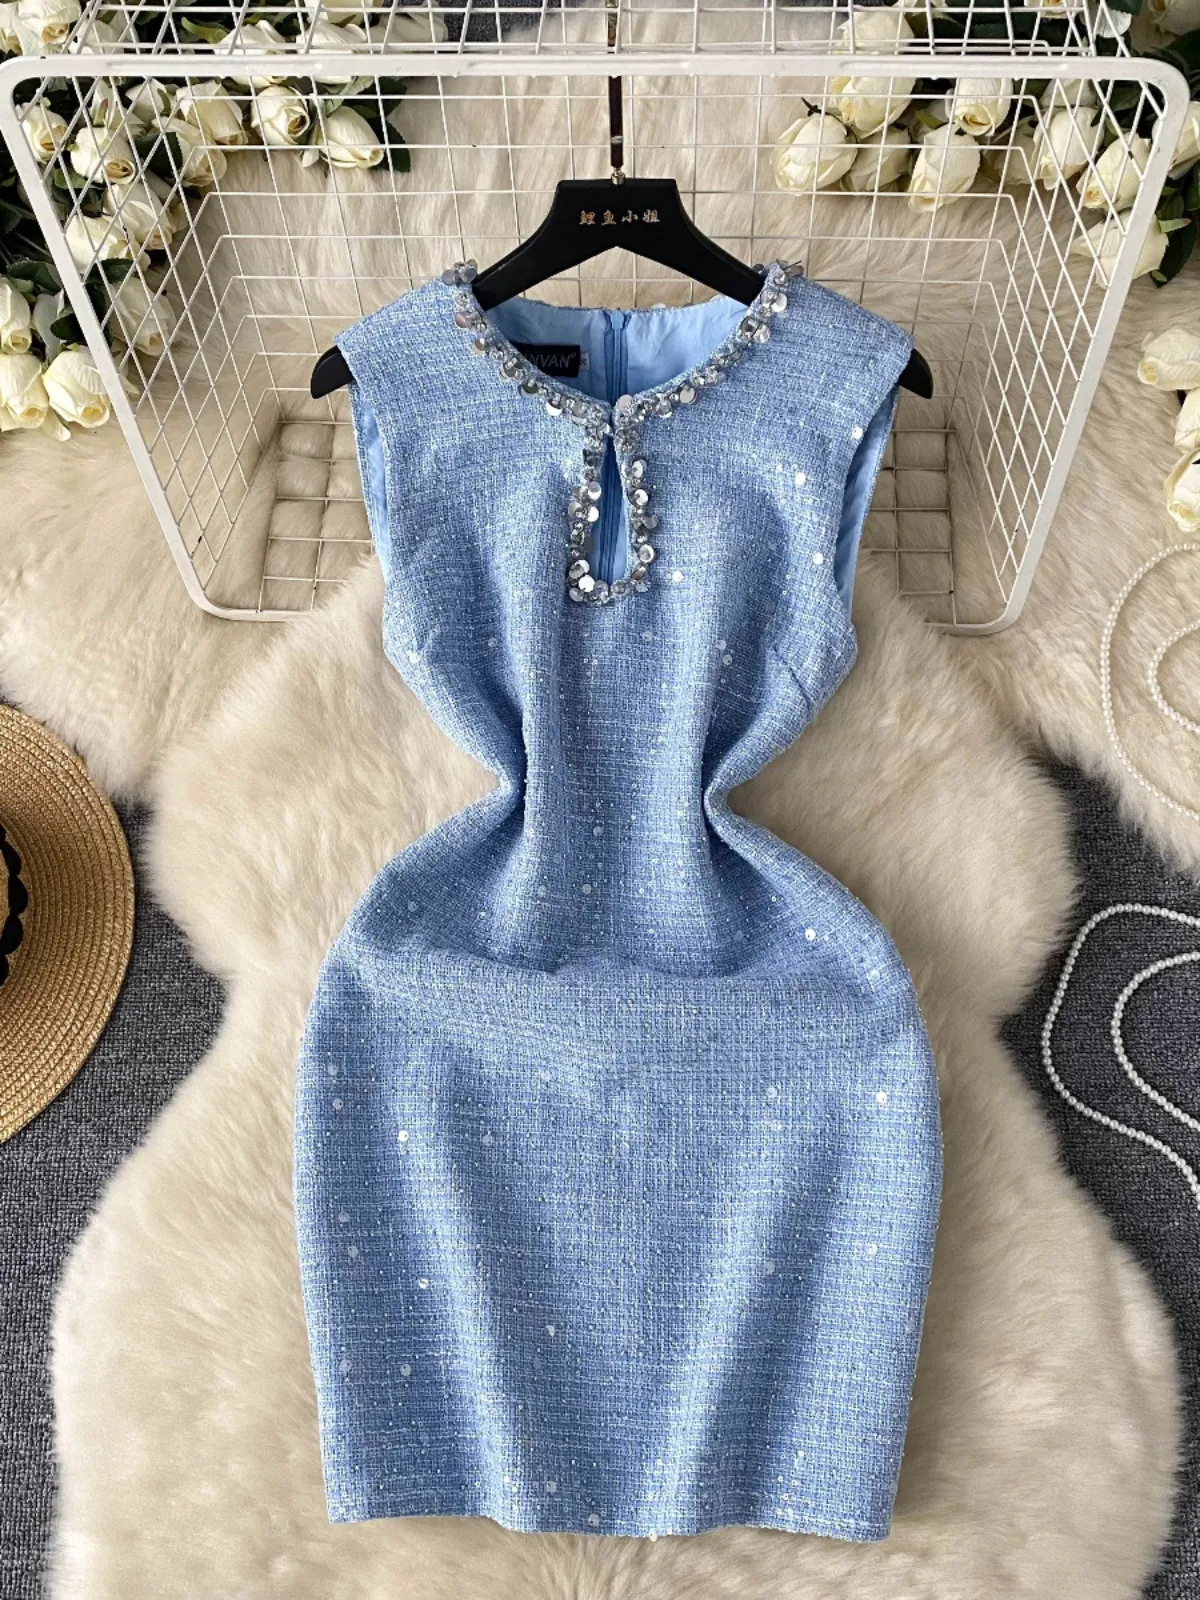 Famous socialite high-end small fragrant style diamond inlaid dress for women's high-end exquisite small dress heavy industry sequin sleeveless vest skirt